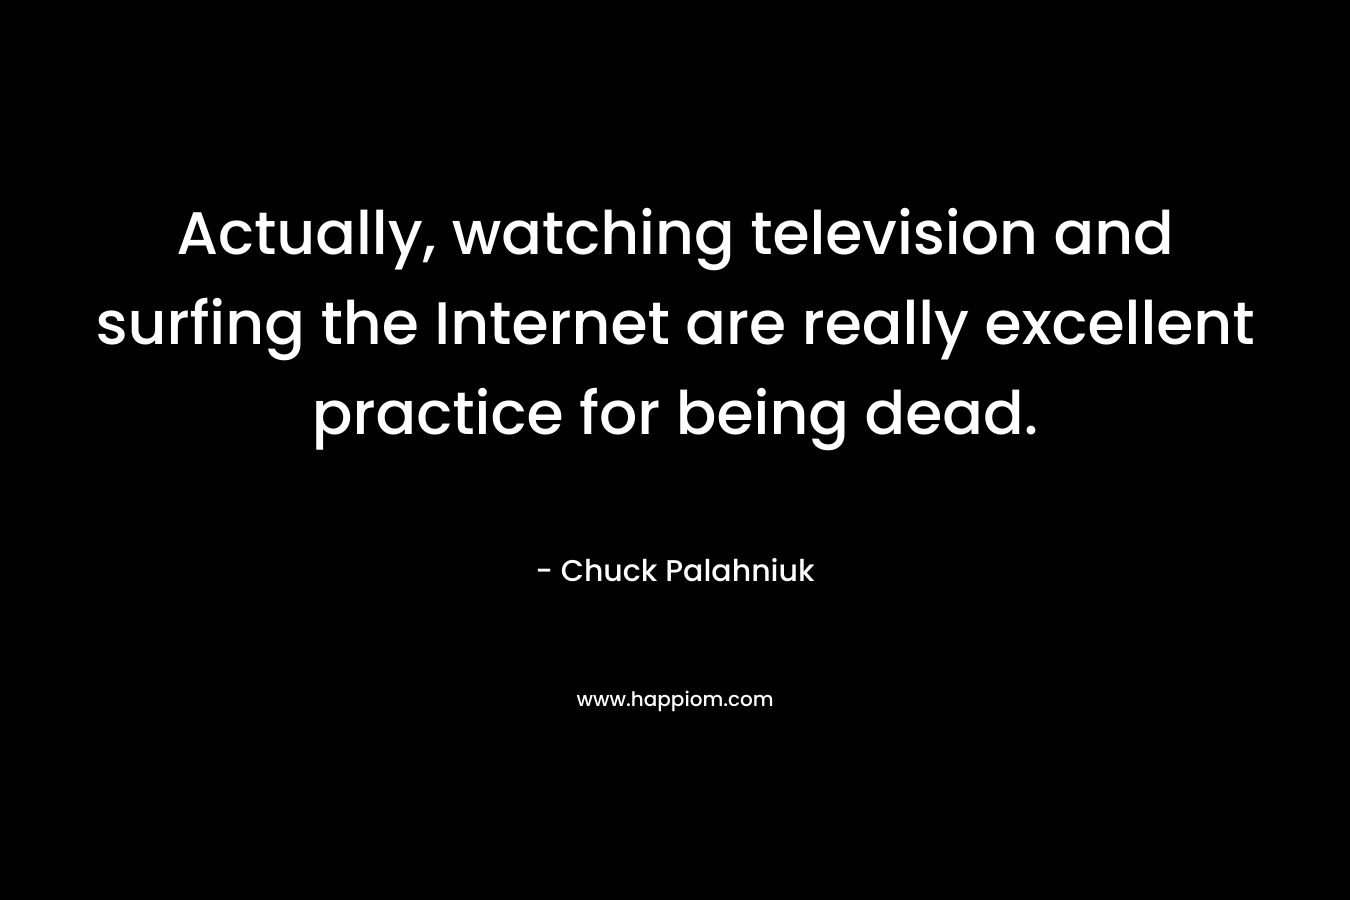 Actually, watching television and surfing the Internet are really excellent practice for being dead.